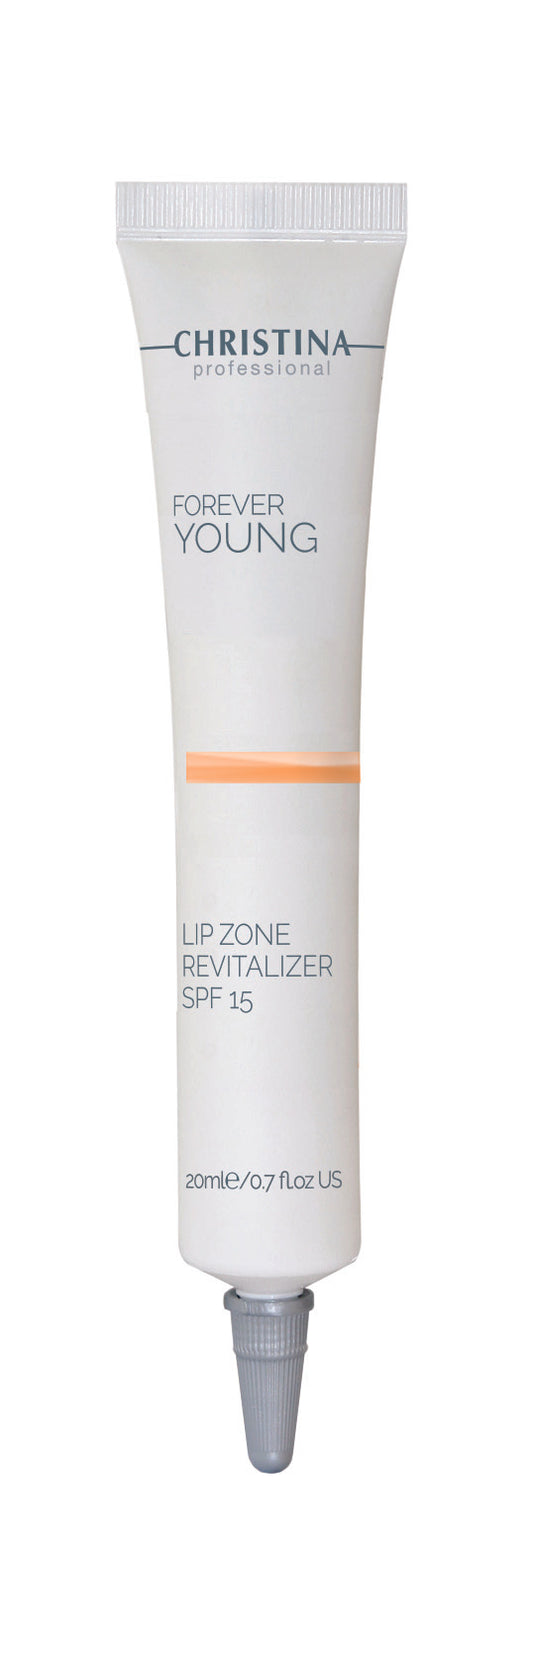 Forever Young - Lip Zone Revitalizer SPF15